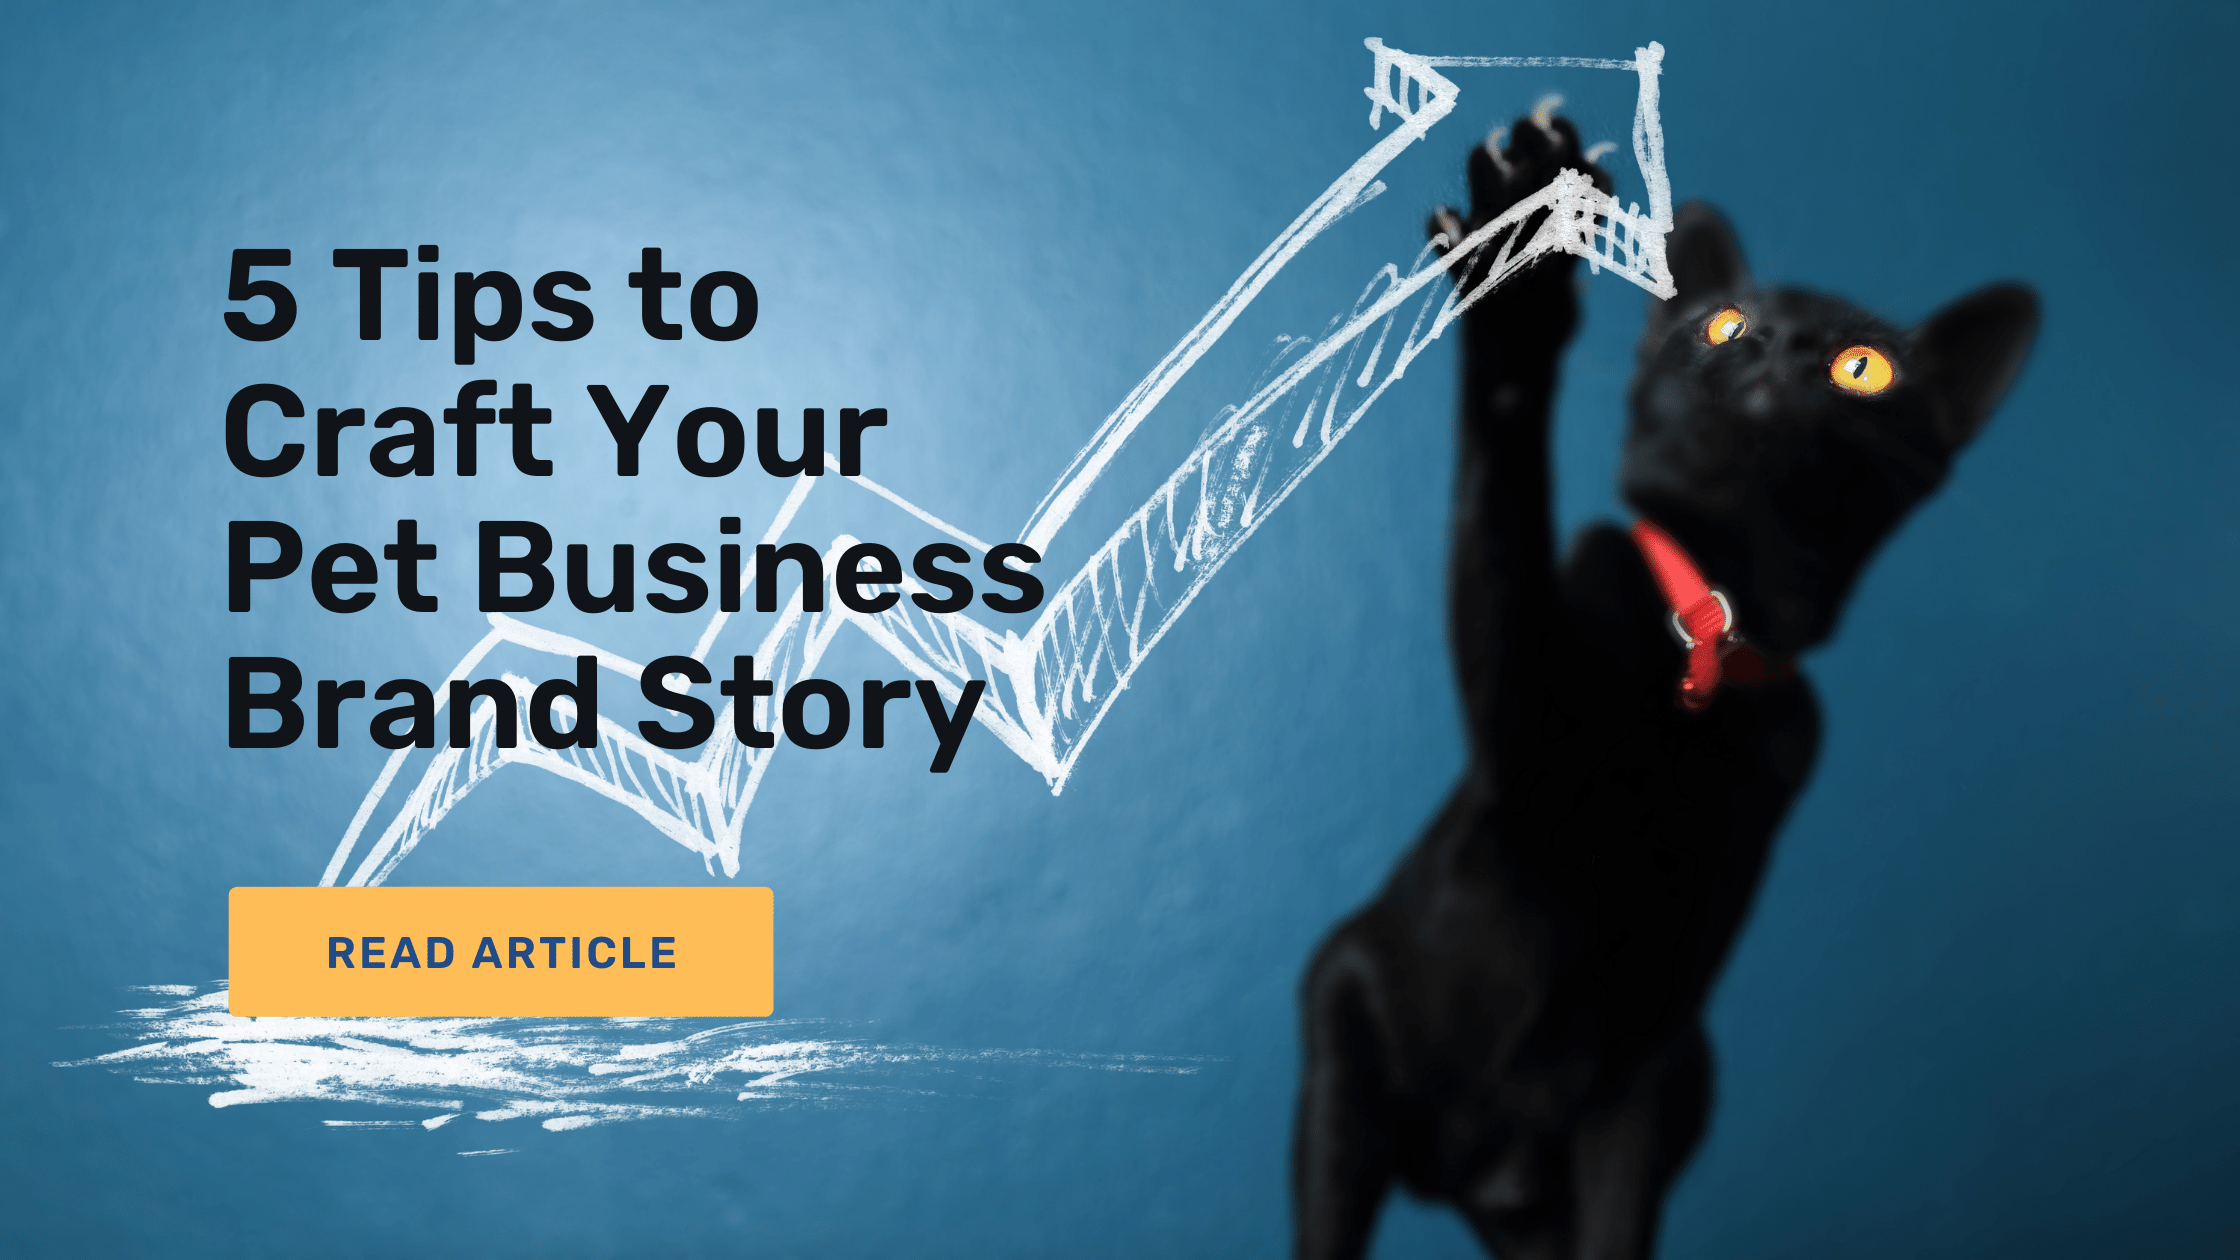 5 Tips to Craft Your Pet Business Brand Story